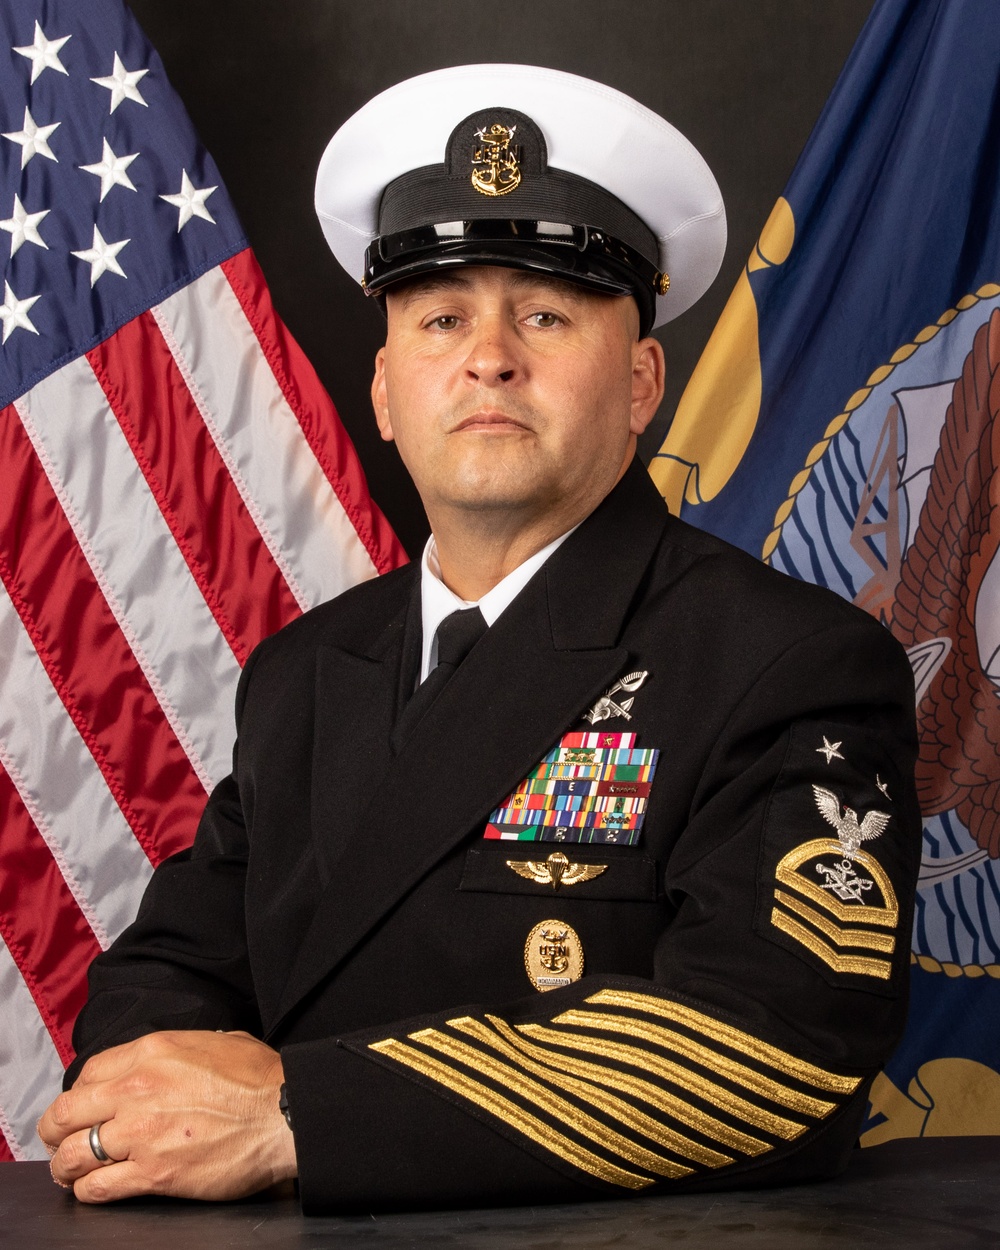 DVIDS - News - Naval Special Warfare Center Welcomes New Command Master ...